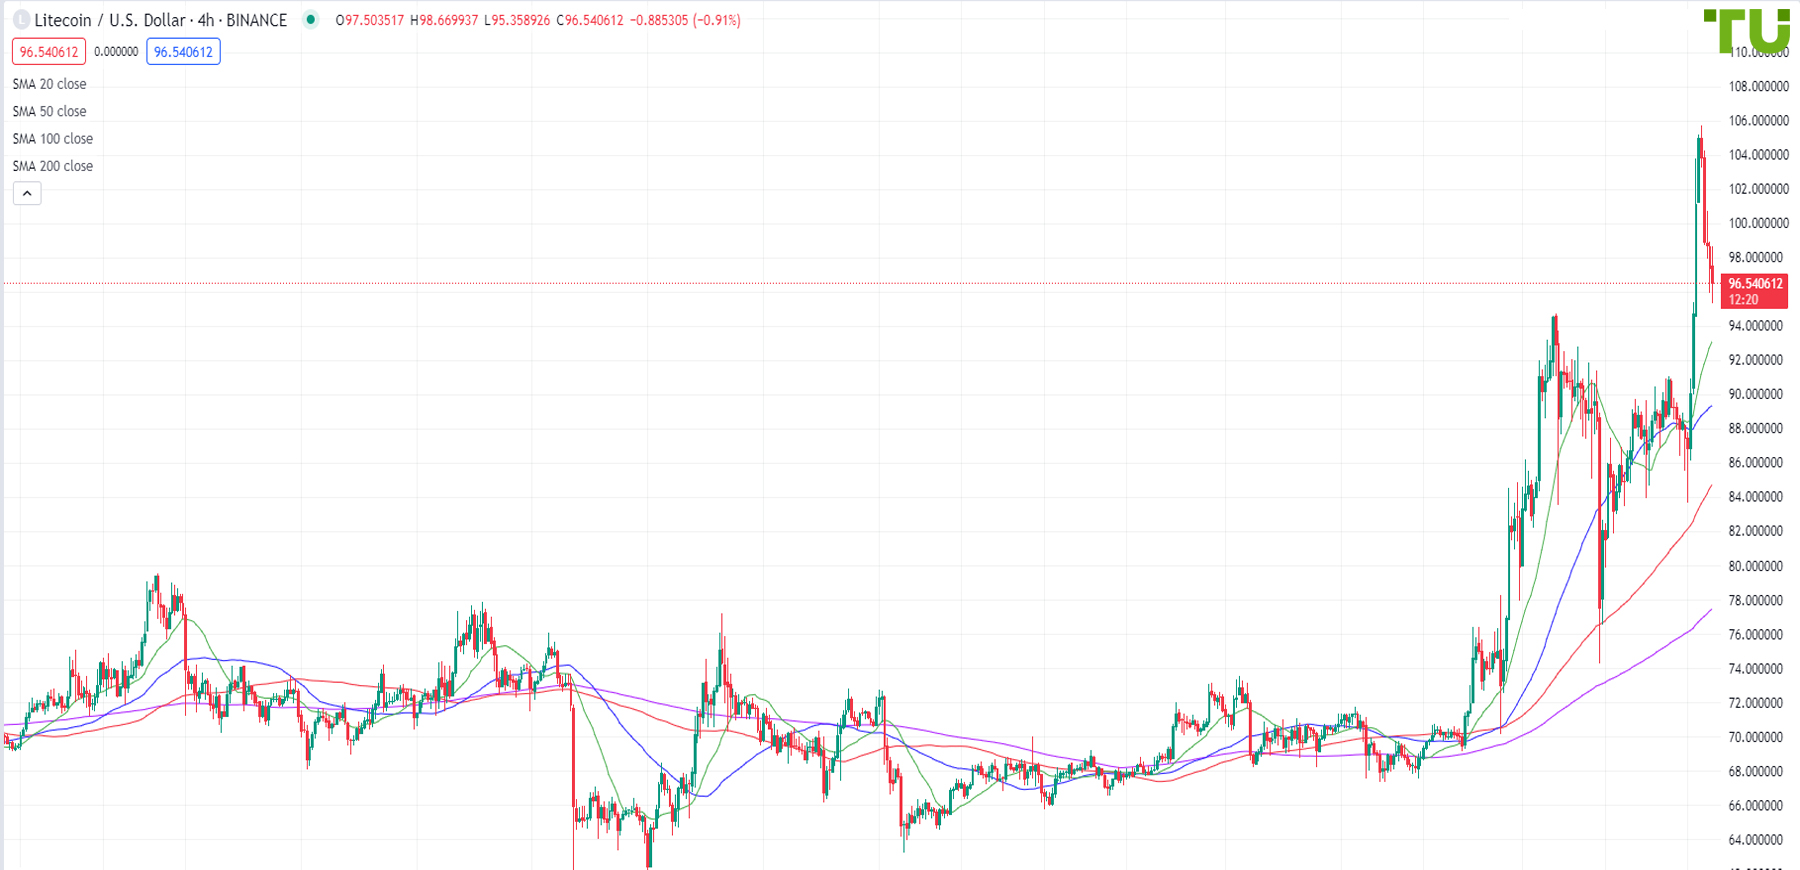 LTC/USD broke out of the consolidation range